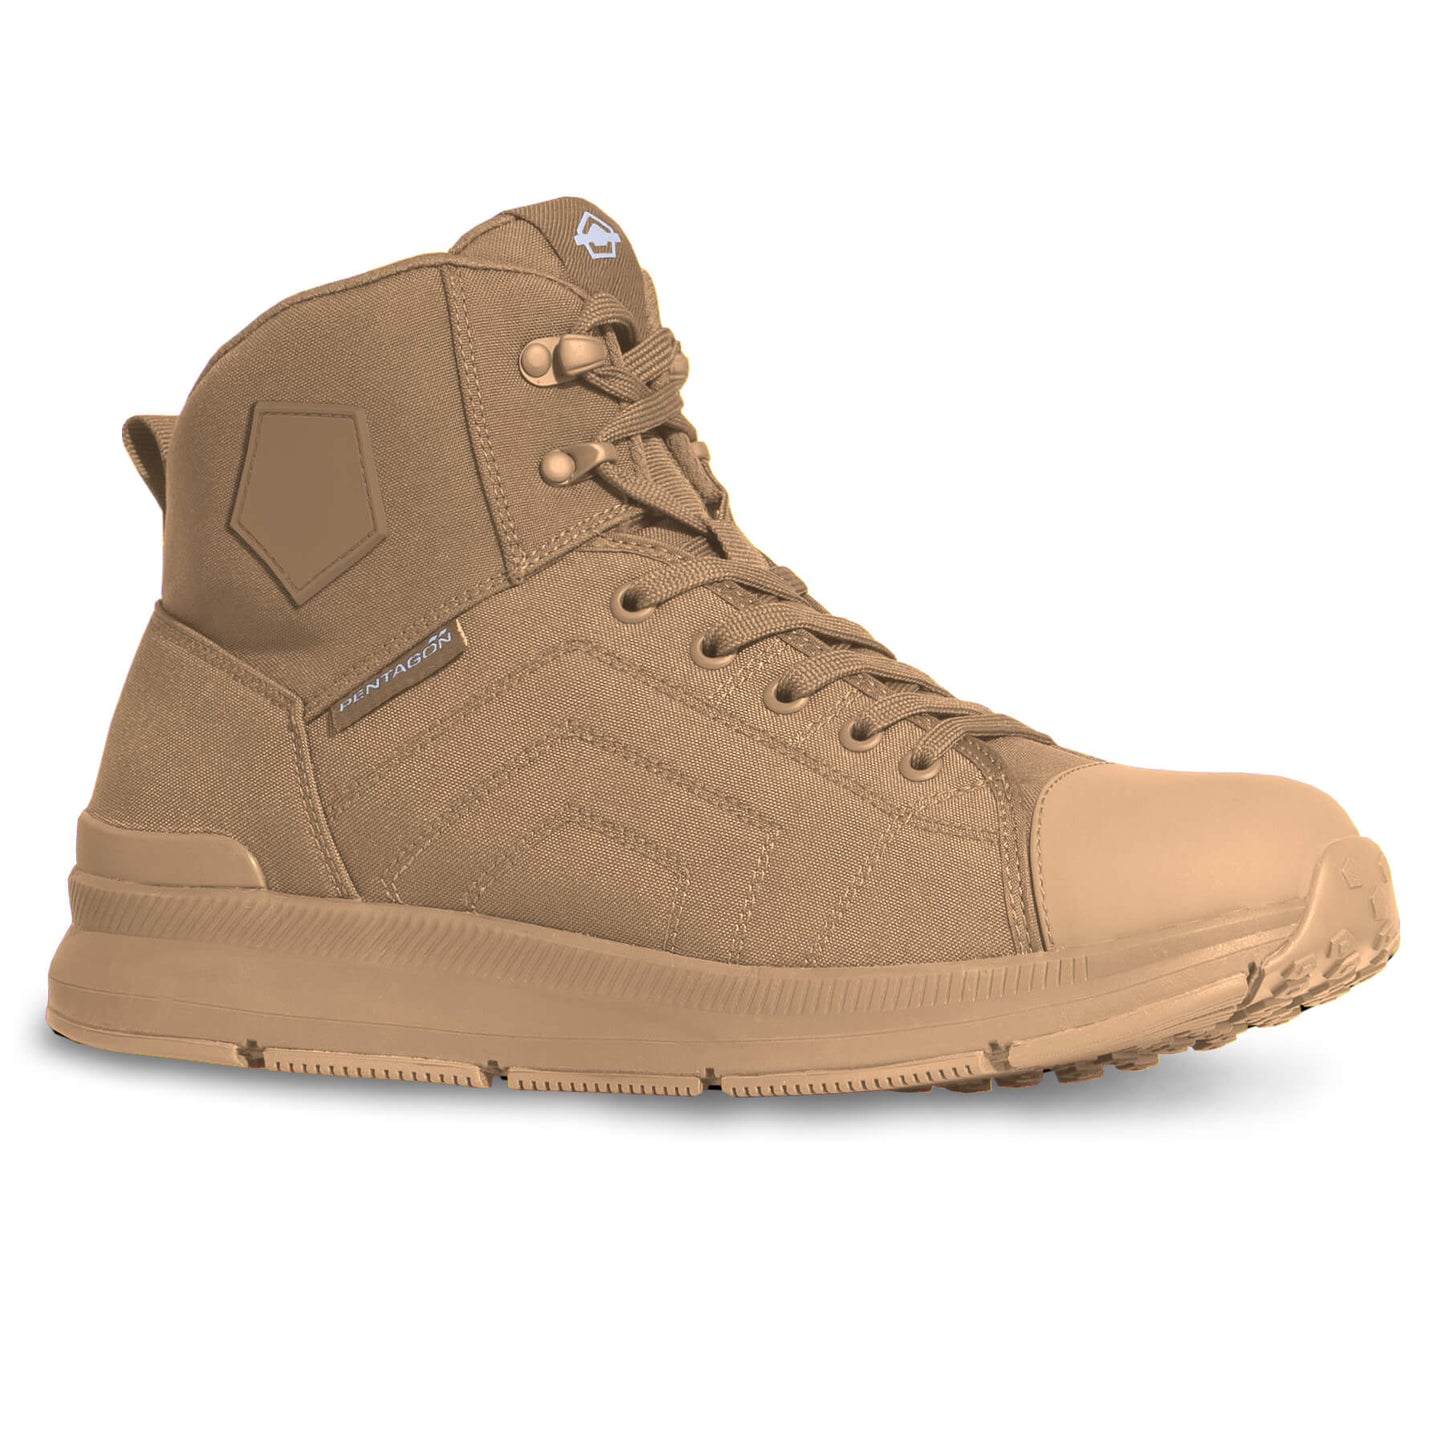 Pentagon Hybrid 2.0 Boots in Coyote